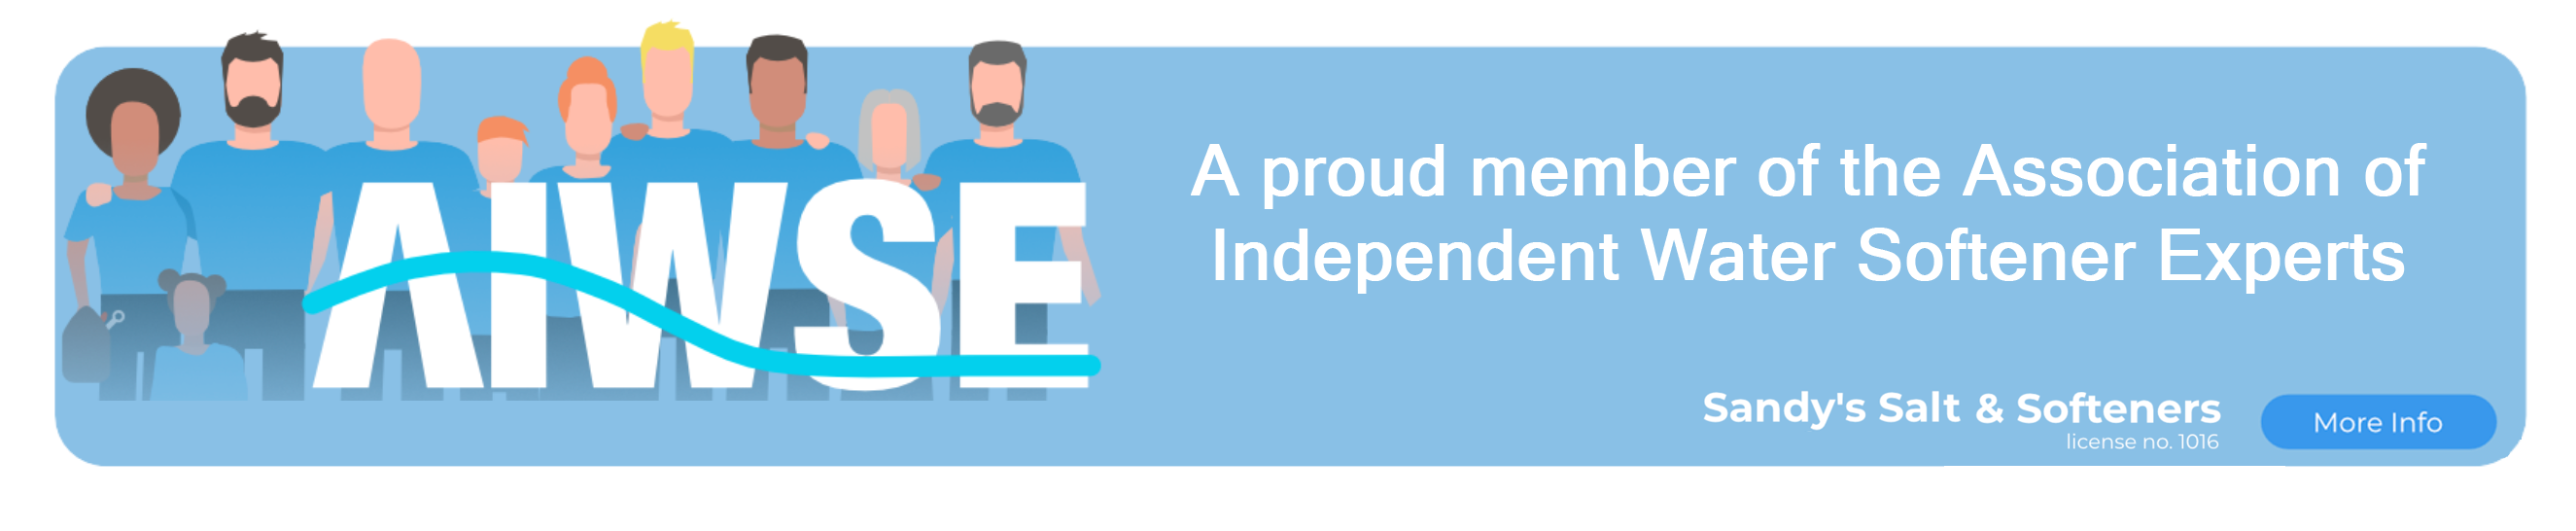 Sandy's Salt & Softeners proud member of the Association of Independent Water Softener Experts